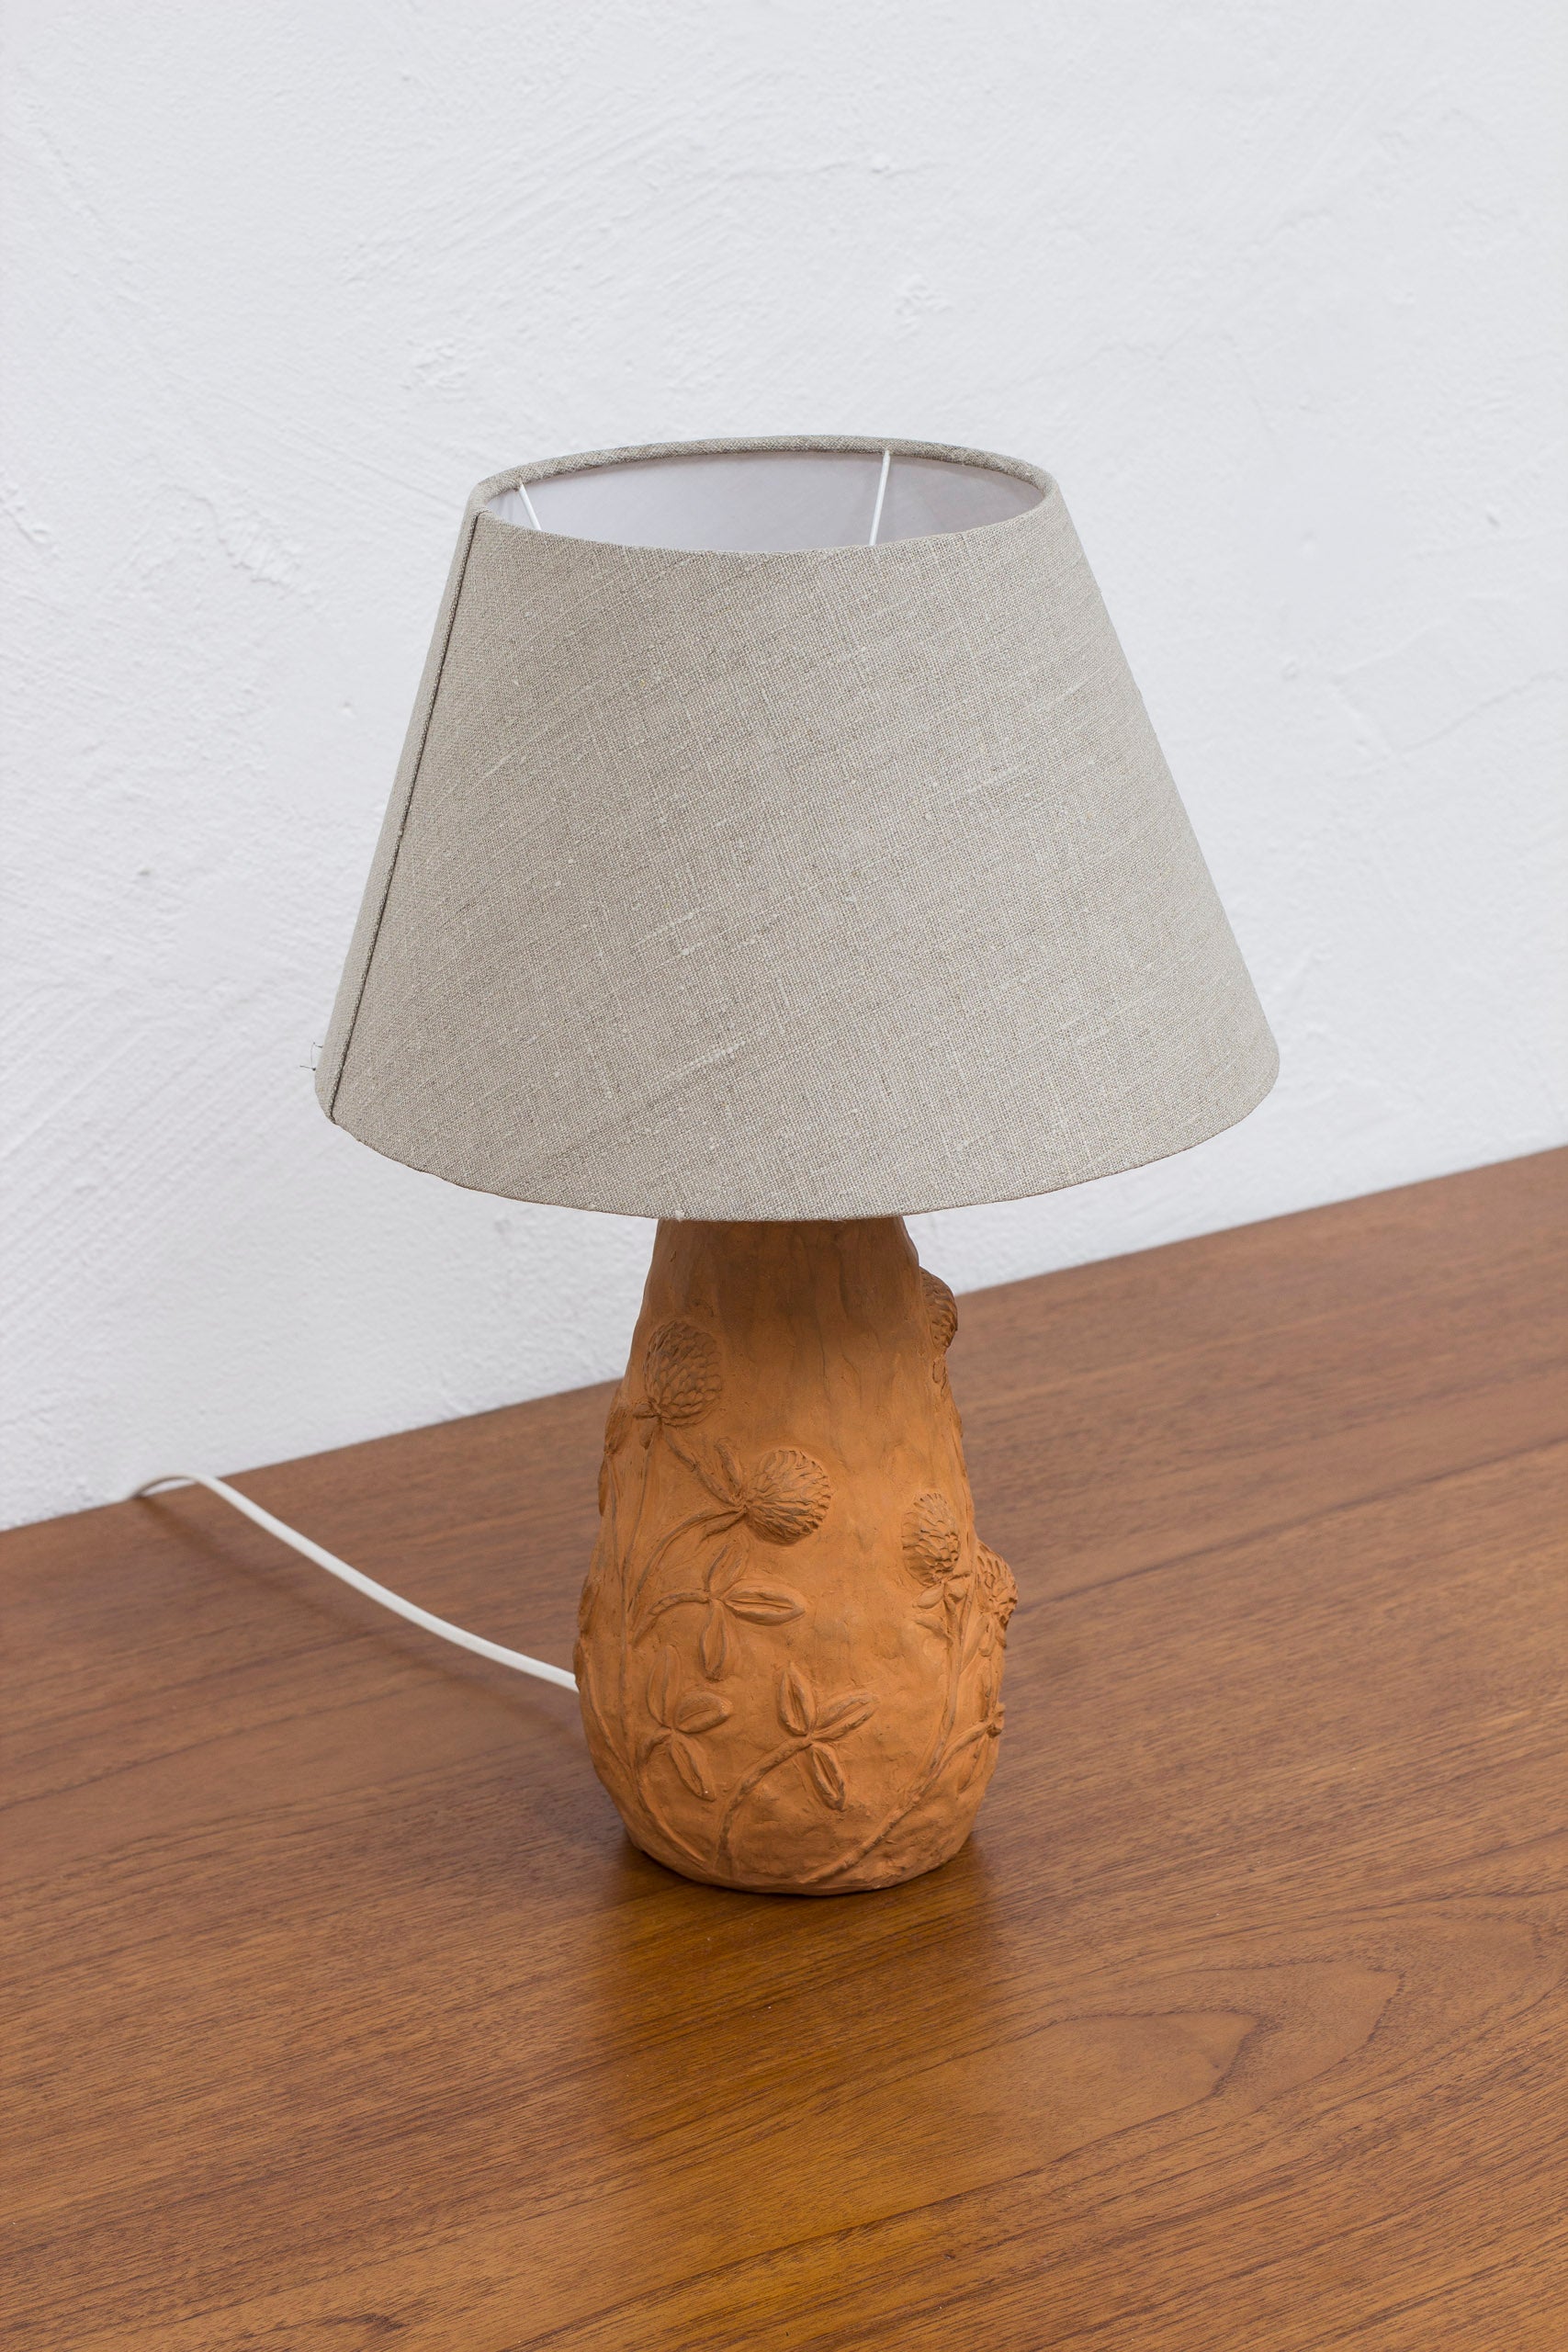 Unique red clover table lamp